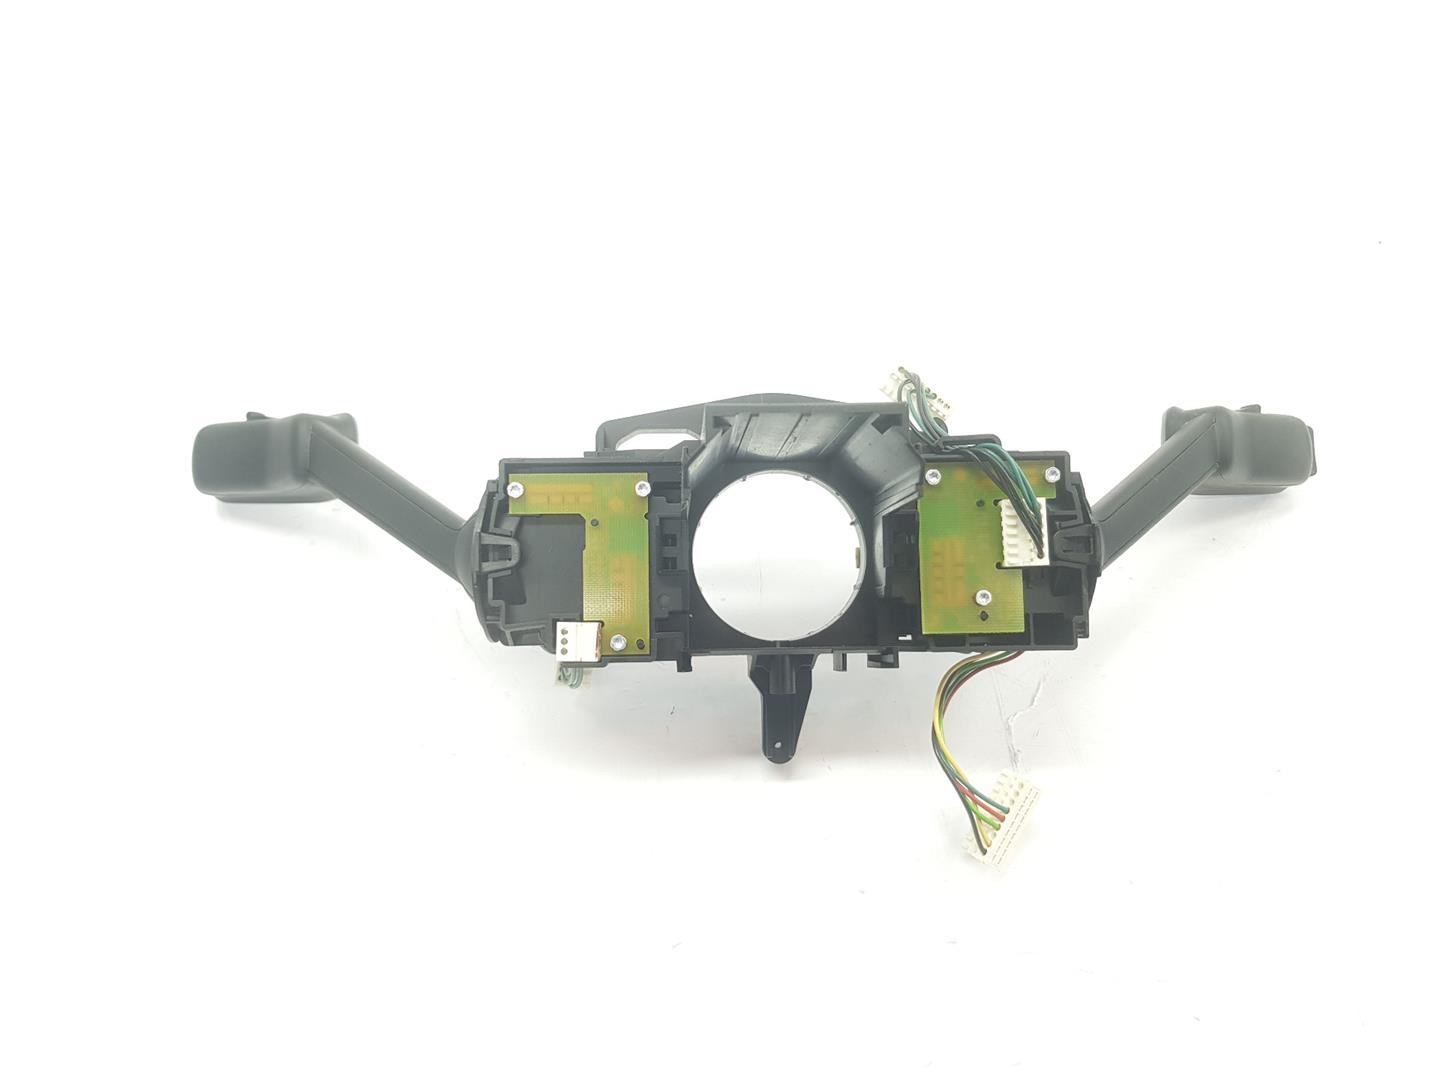 SEAT Leon 3 generation (2012-2020) Steering wheel buttons / switches 5Q0953513R, 5Q0953513R 24175072